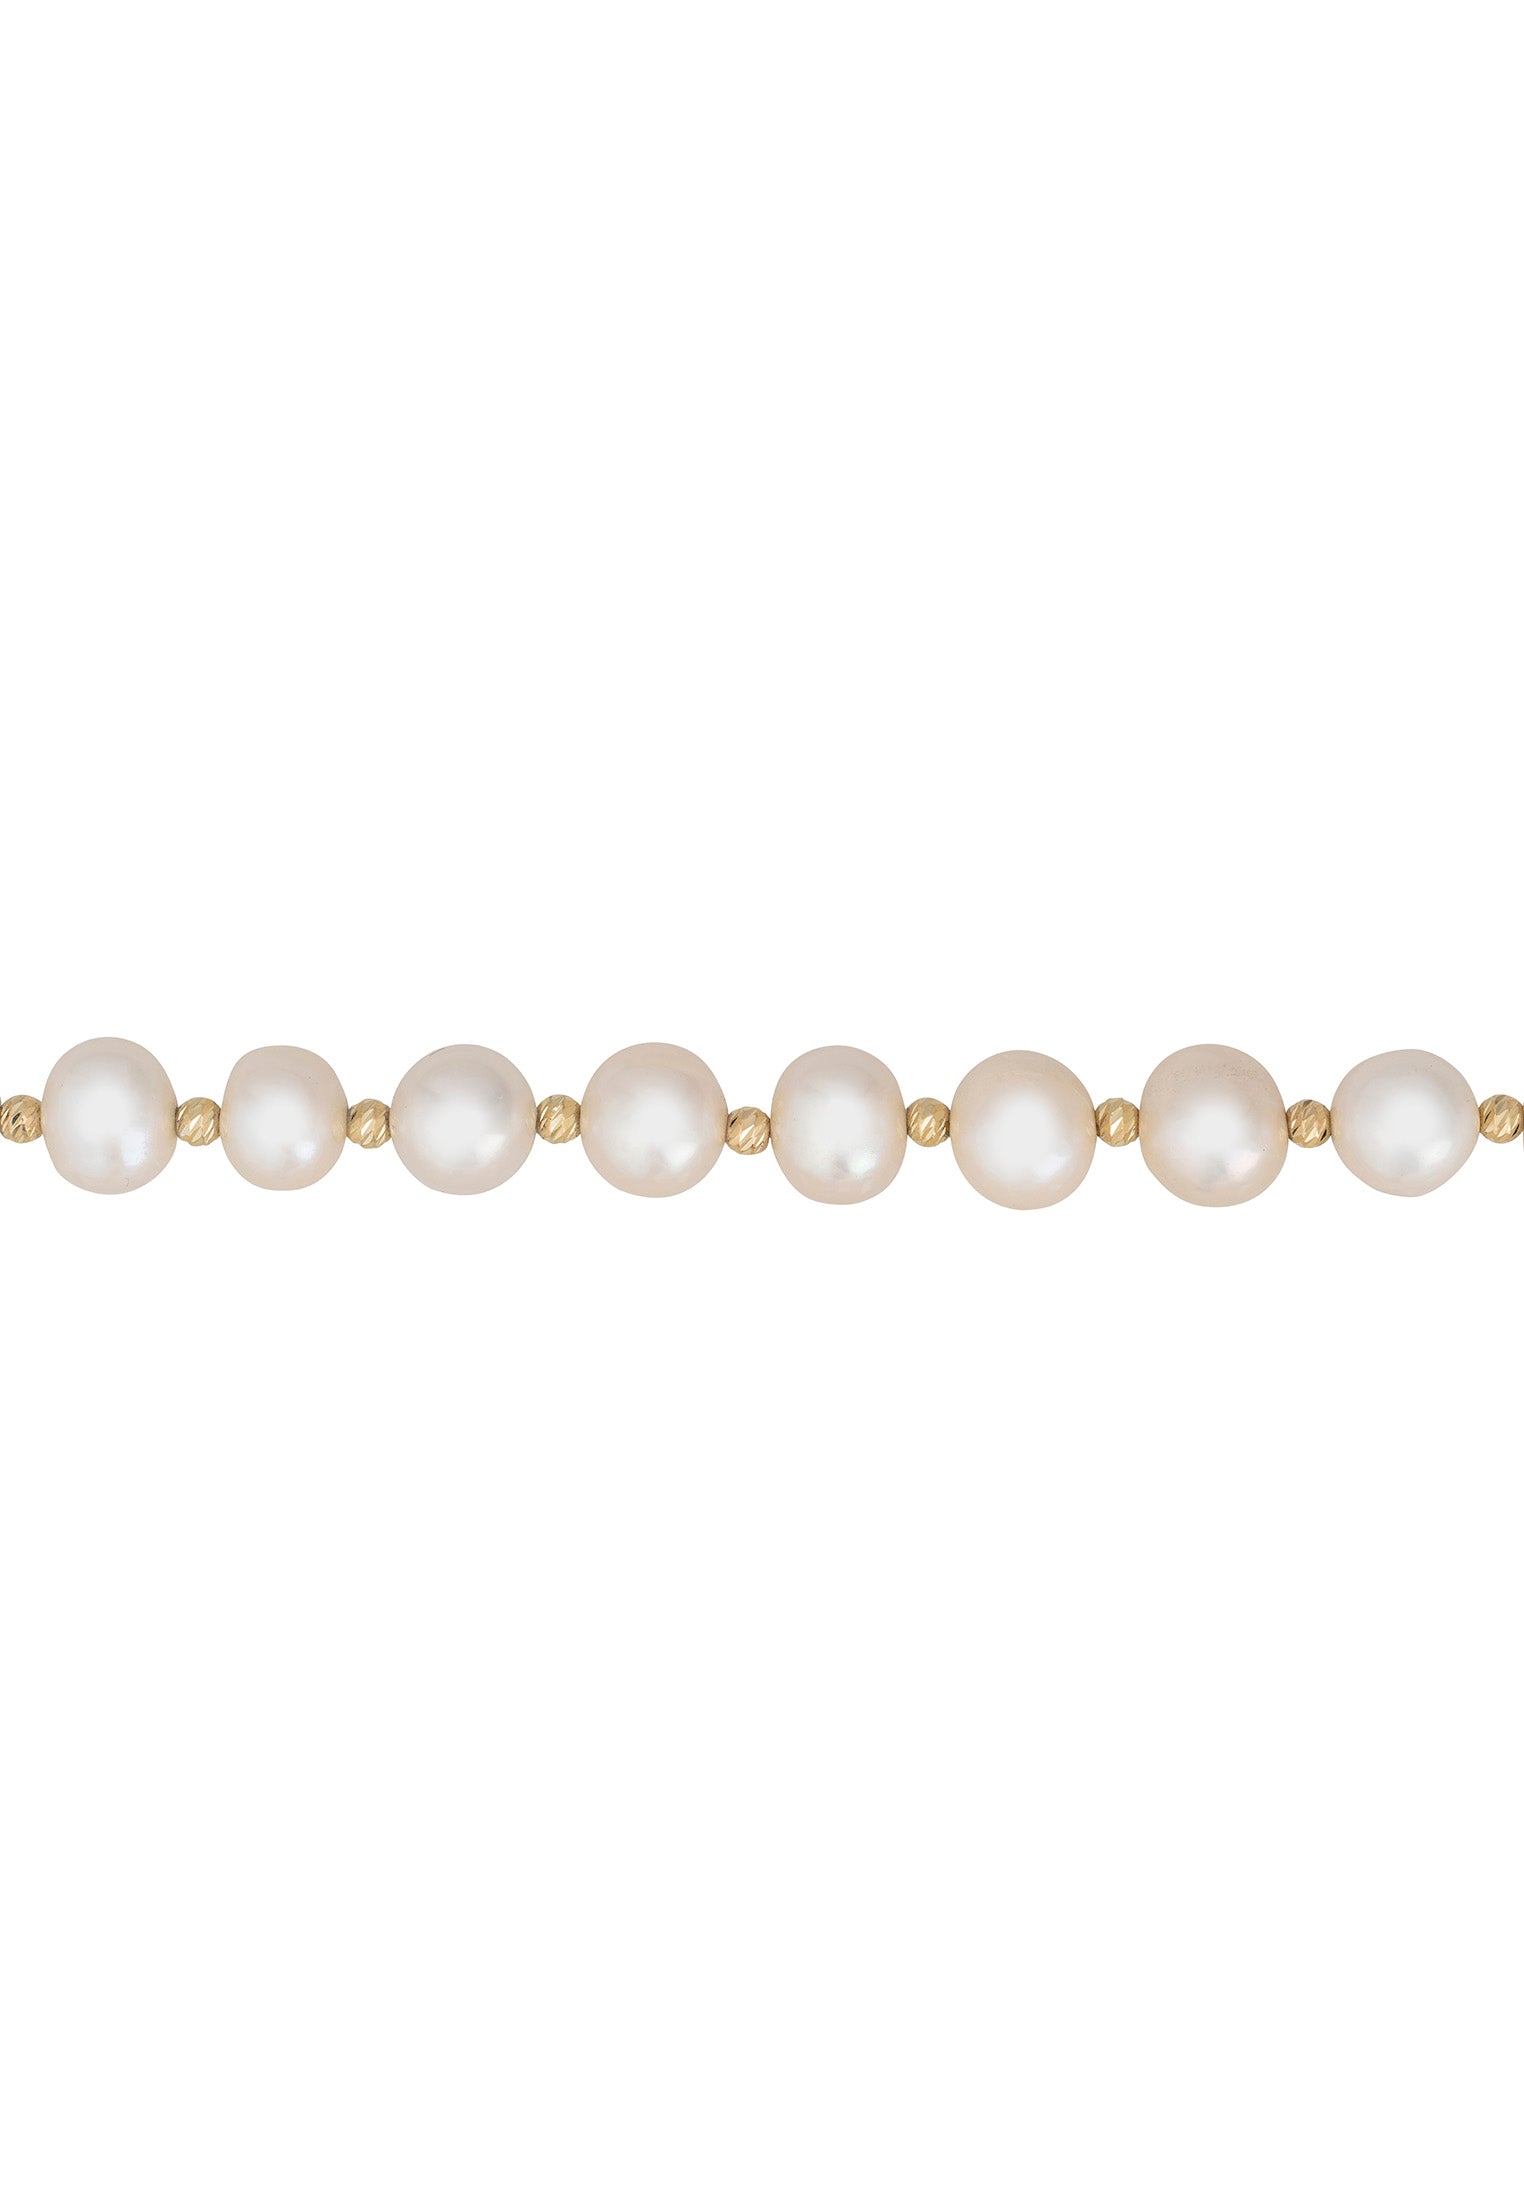 Solid 14K Gold Classic Natural Pearl Bracelet